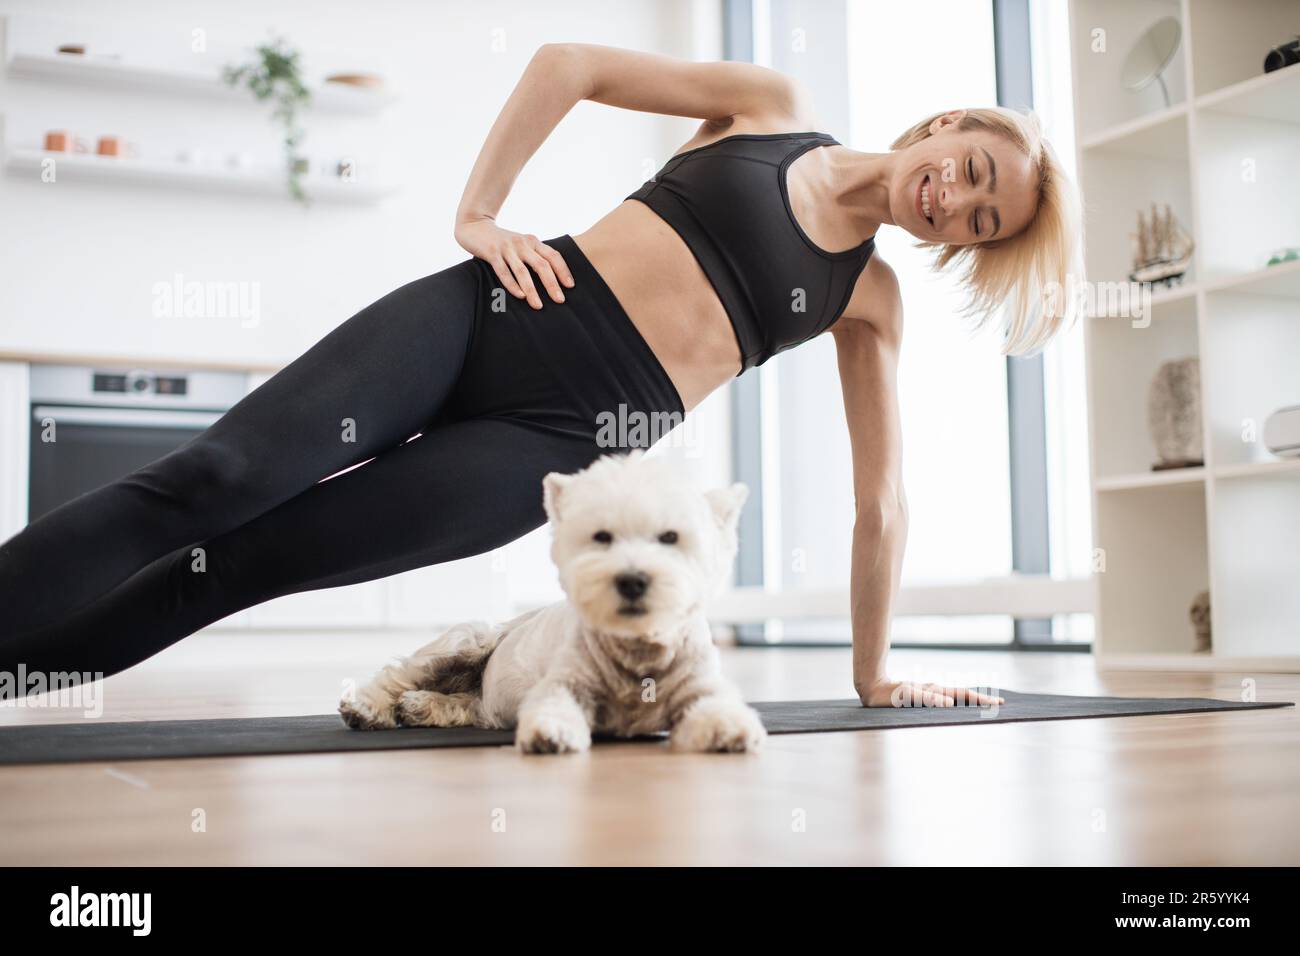 Selective view of attractive slim adult in activewear working out Vasisthasana exercise while small pet relaxing on floor. Good-natured Westie becoming well-suited buddy for yoga workout indoors. Stock Photo